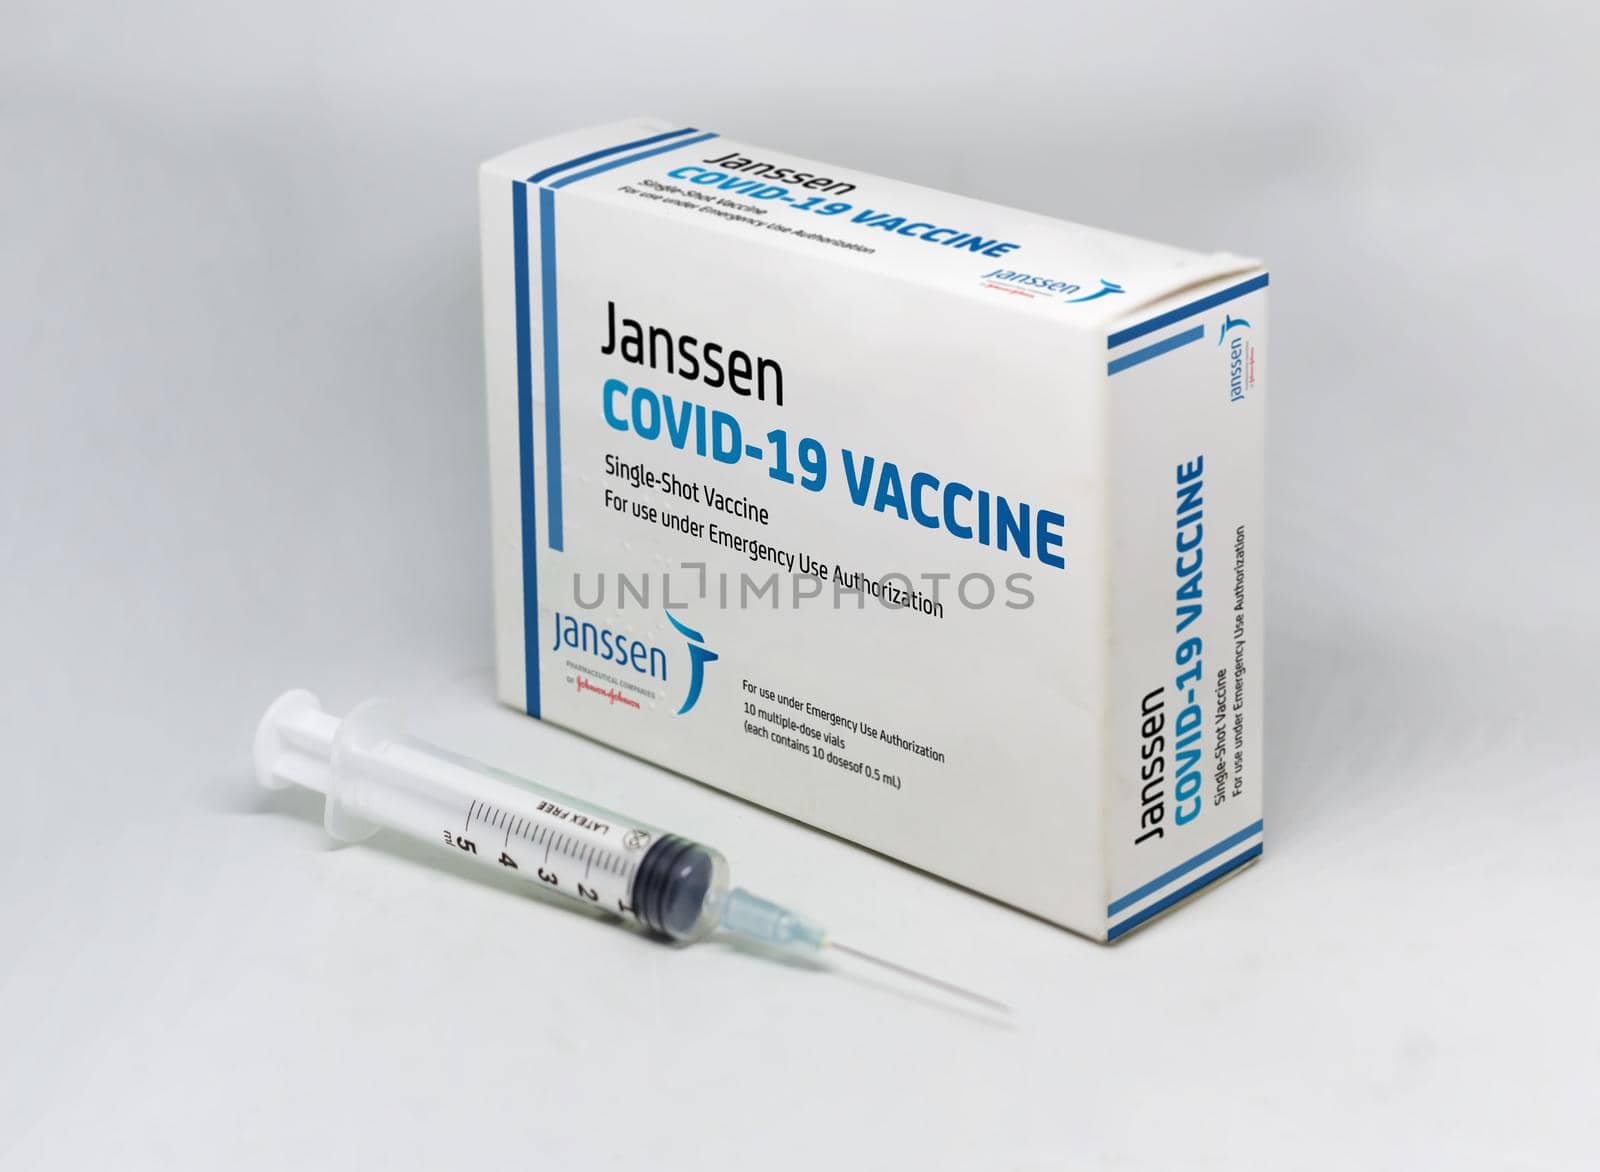 New York, USA, April 12th 2021: A syringe next to the Janssen Covid-19 vaccine box. Janssen is a subsiadiary company of Johnson and Johnson and devoloped the first single-shot Covid-19 vaccine